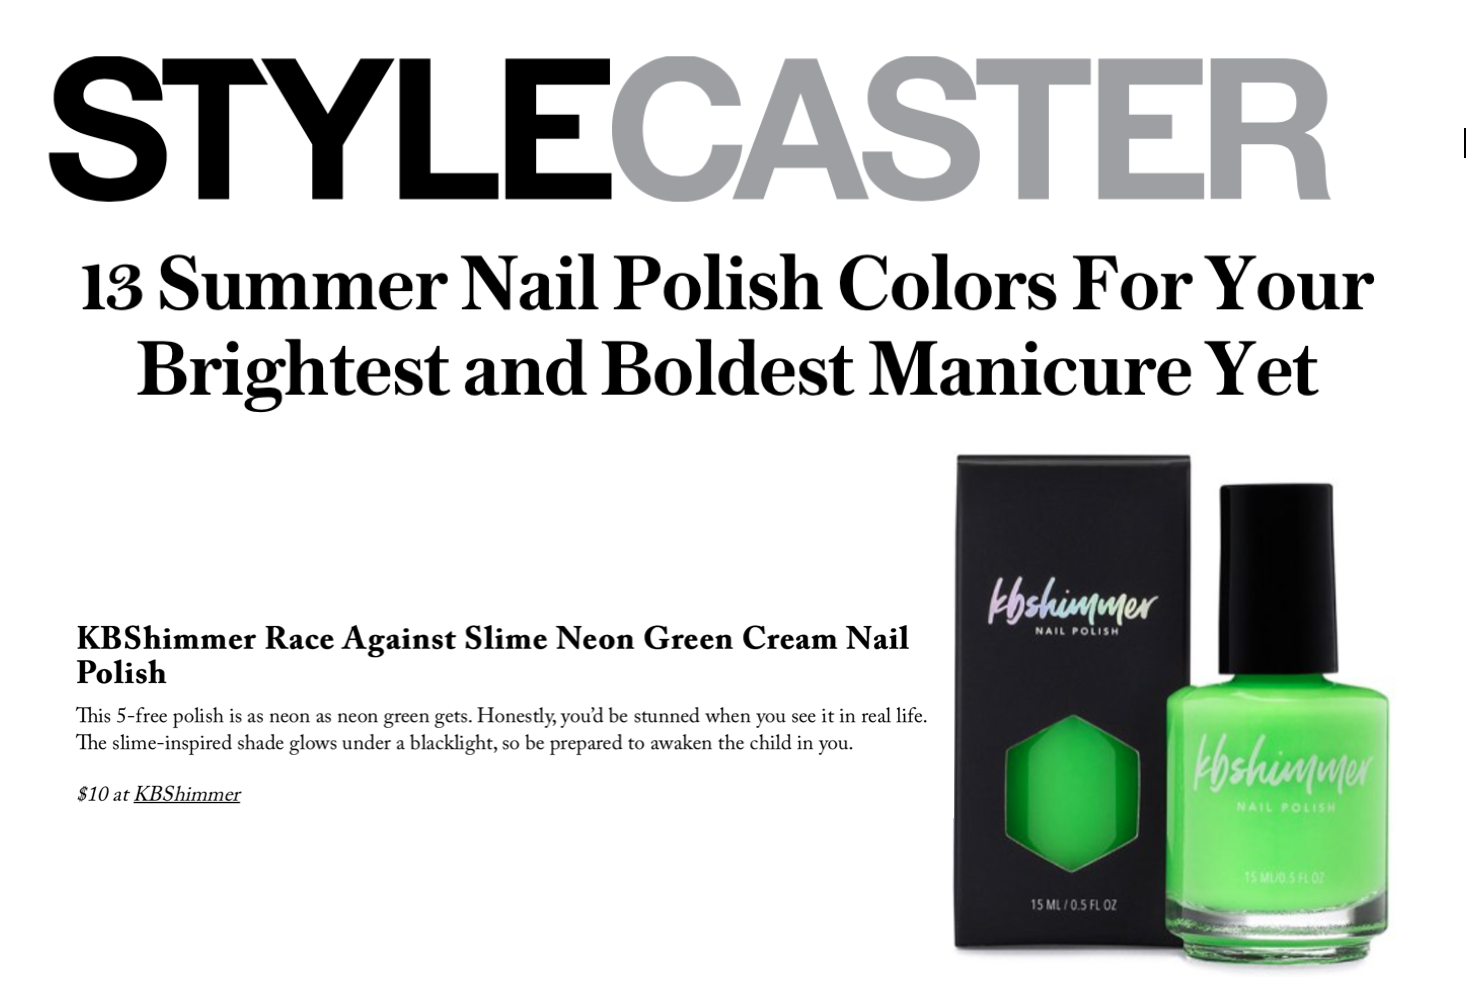 StyleCaster 7.14.19.png